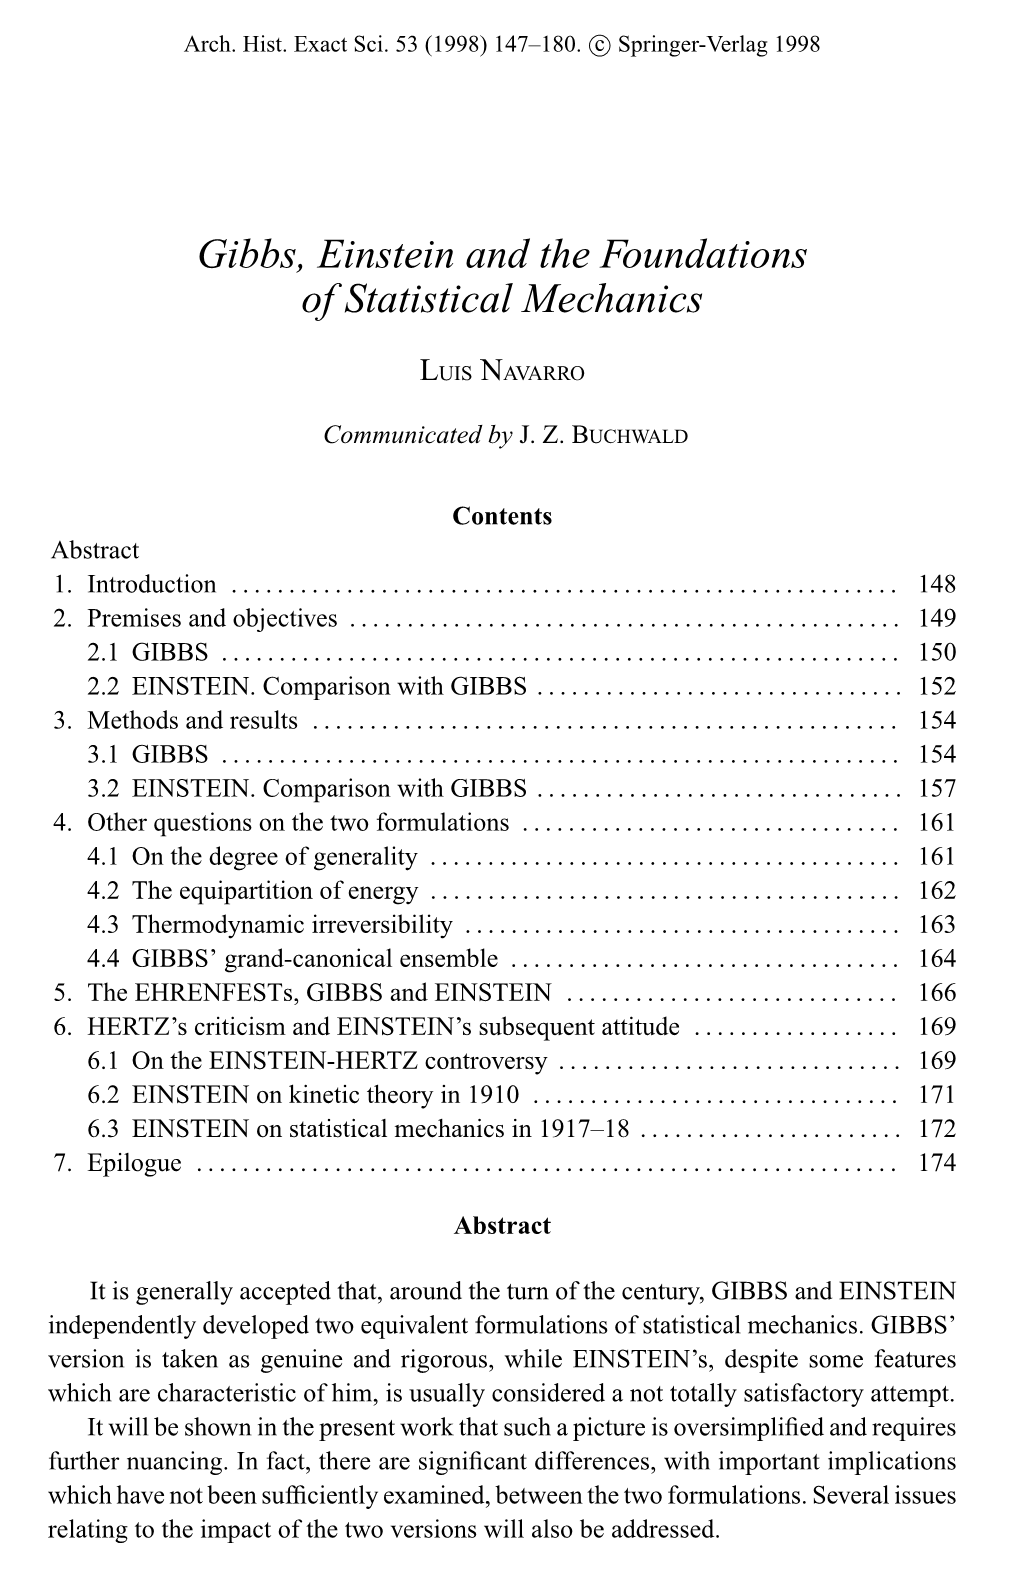 Gibbs, Einstein and the Foundations of Statistical Mechanics